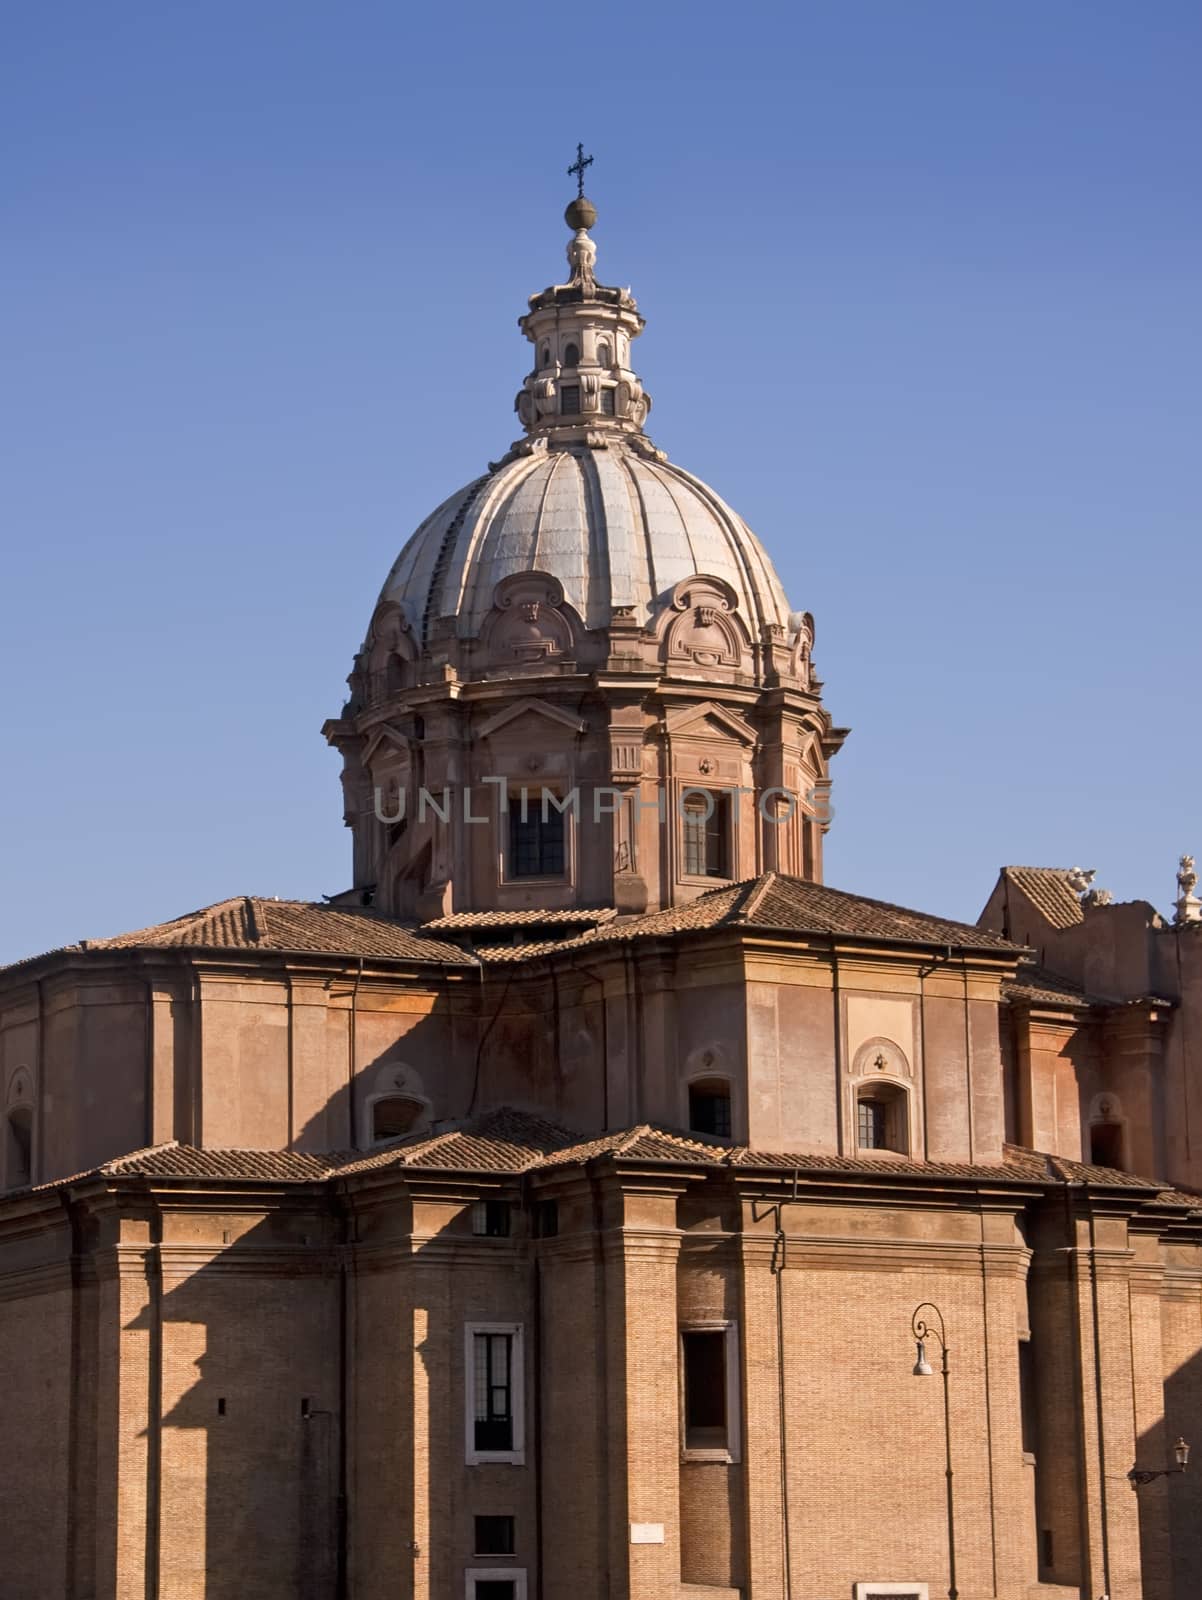 Dome of the church in Forum Romanum in Rome by fotoecho